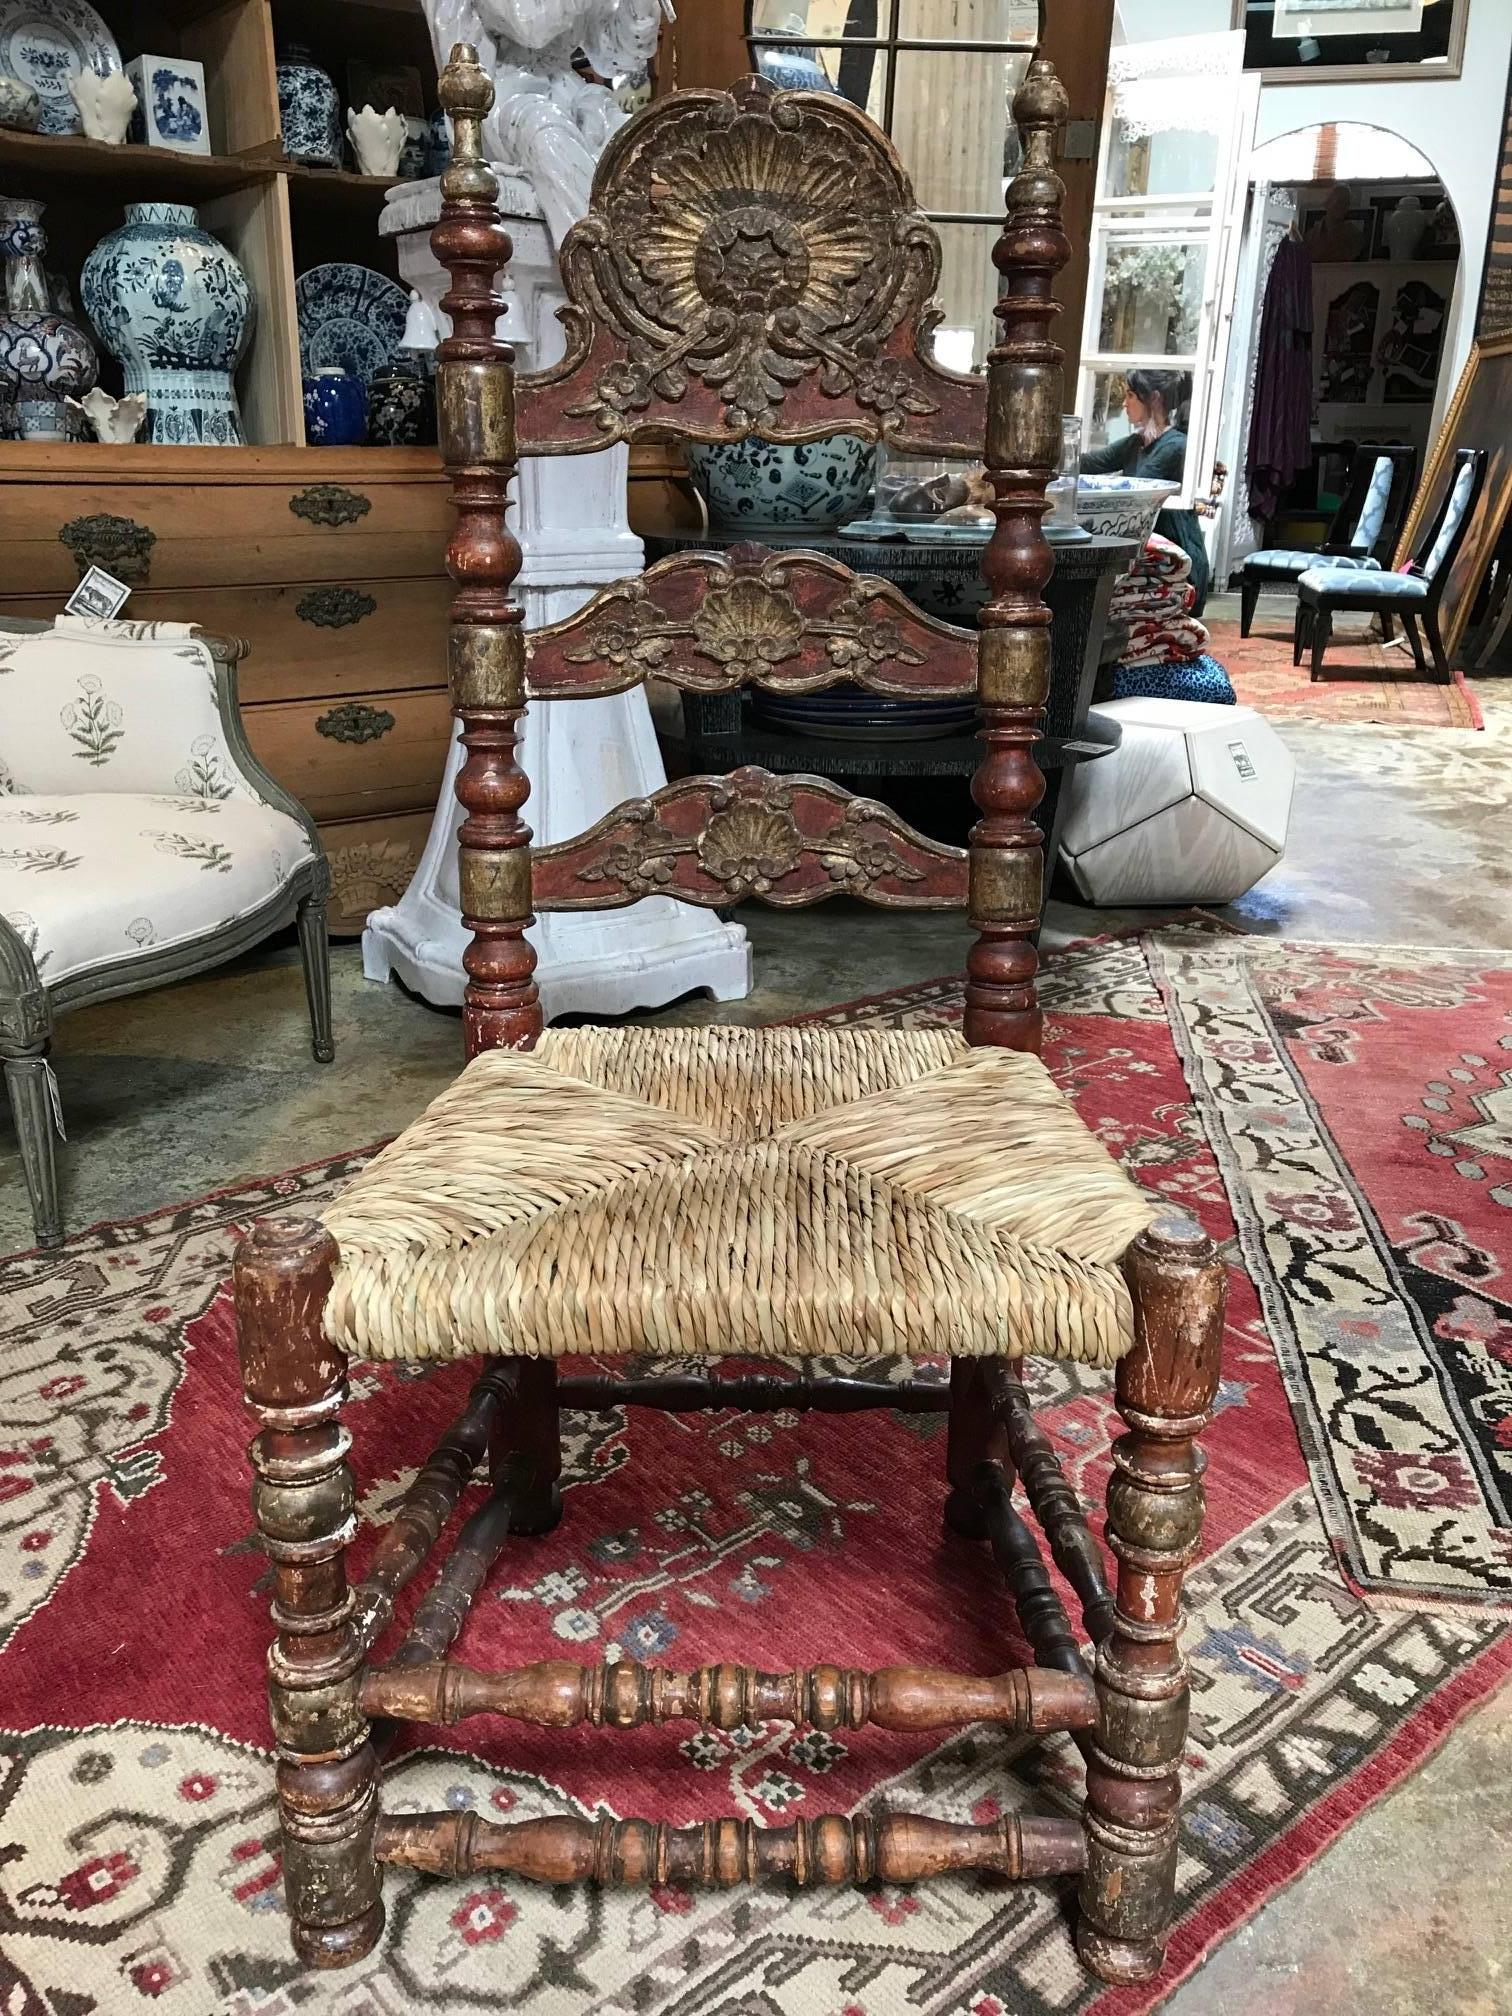 These Classic beauties are 19th century painted Spanish Baroque side chairs with rush seats. They have minor losses consistent with age and use. Not the most structurally sound pieces but they are in original, un-restored country house condition.